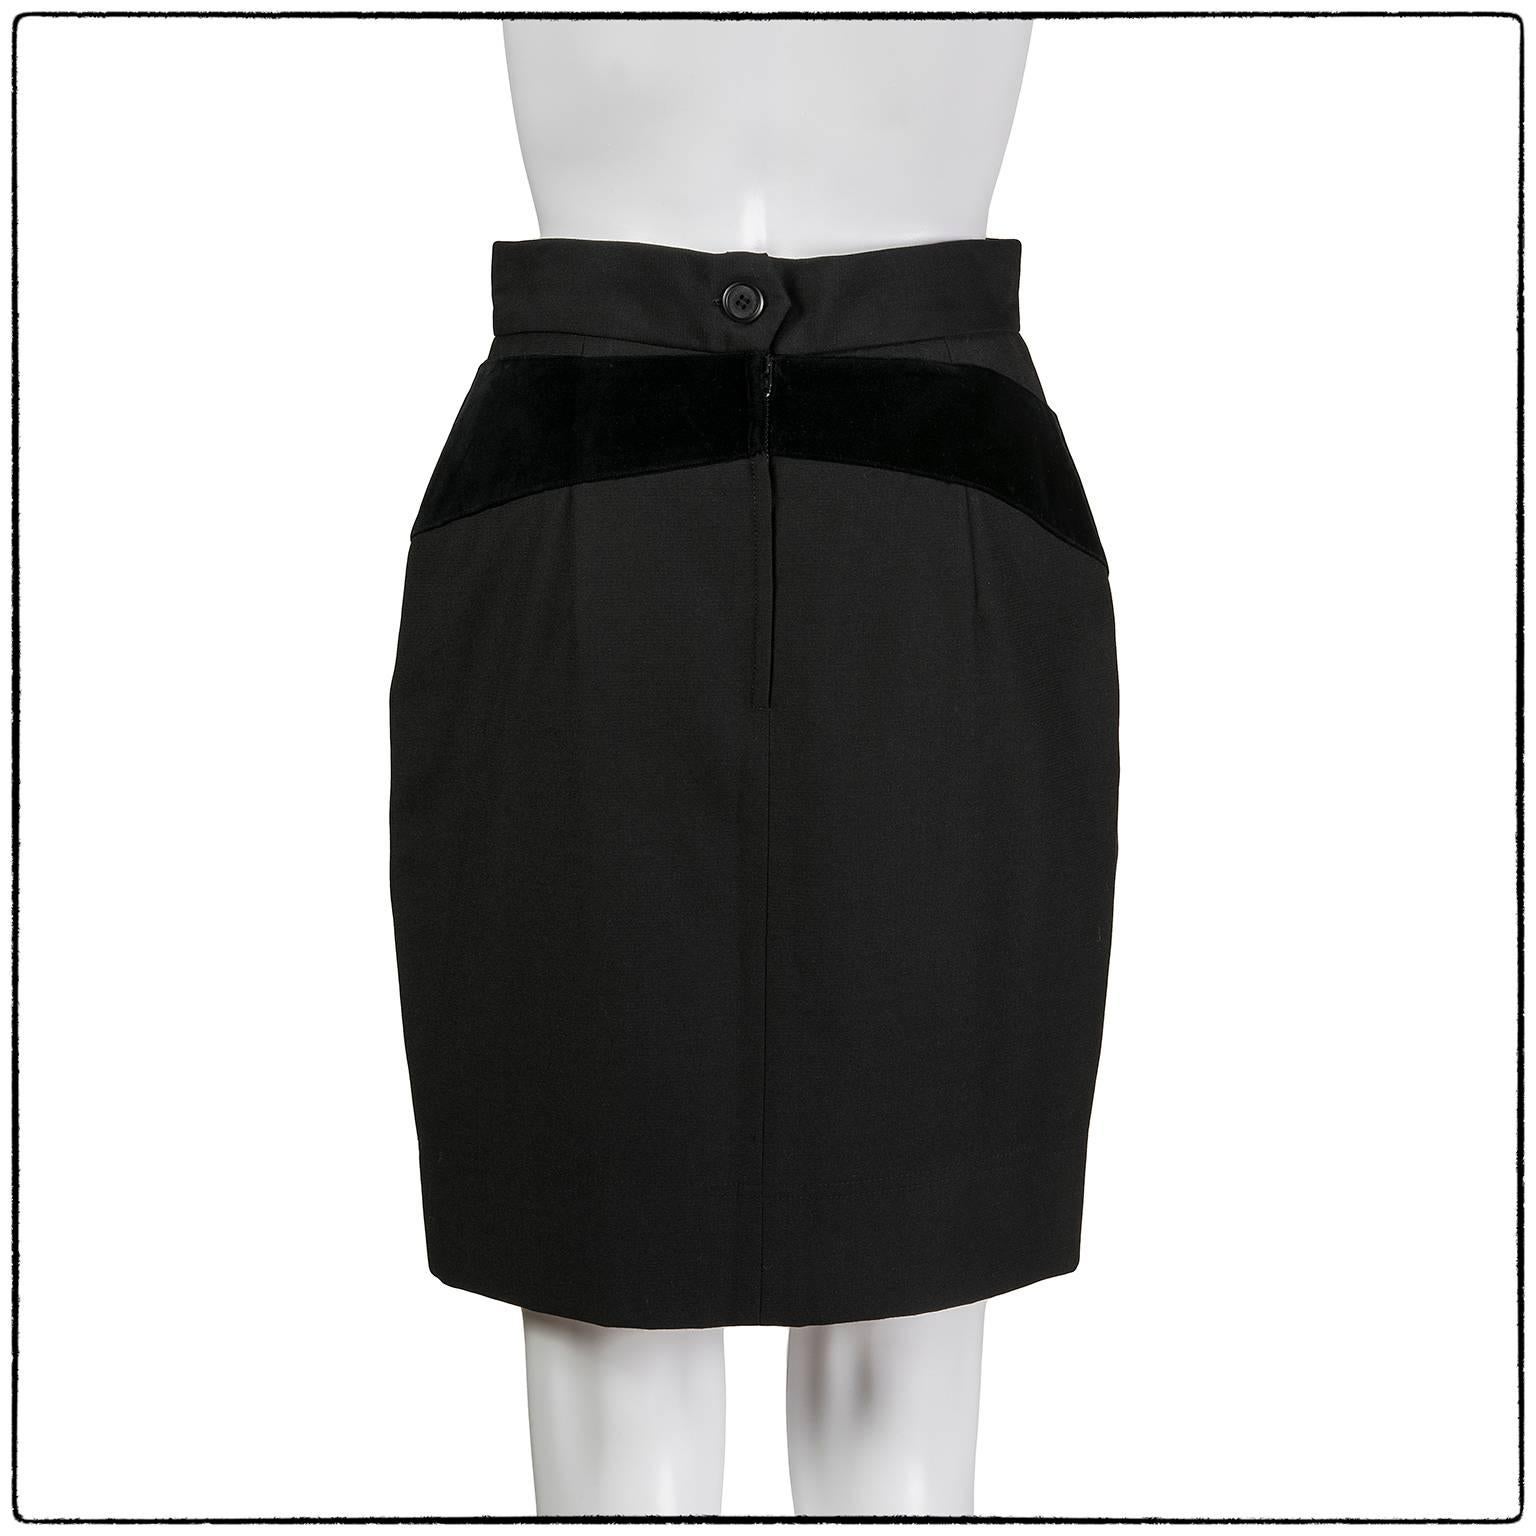 Moschino Cheap and Chic 90's black pencil skirt with black velvet question mark detail.

Brand: Moschino Cheap and Chic

Size : 42 IT, 10 UK, 6 US

Material: wool, velvet
Fully lined in 60% acetate, 40% rayon.

Condition: good condition, Some light